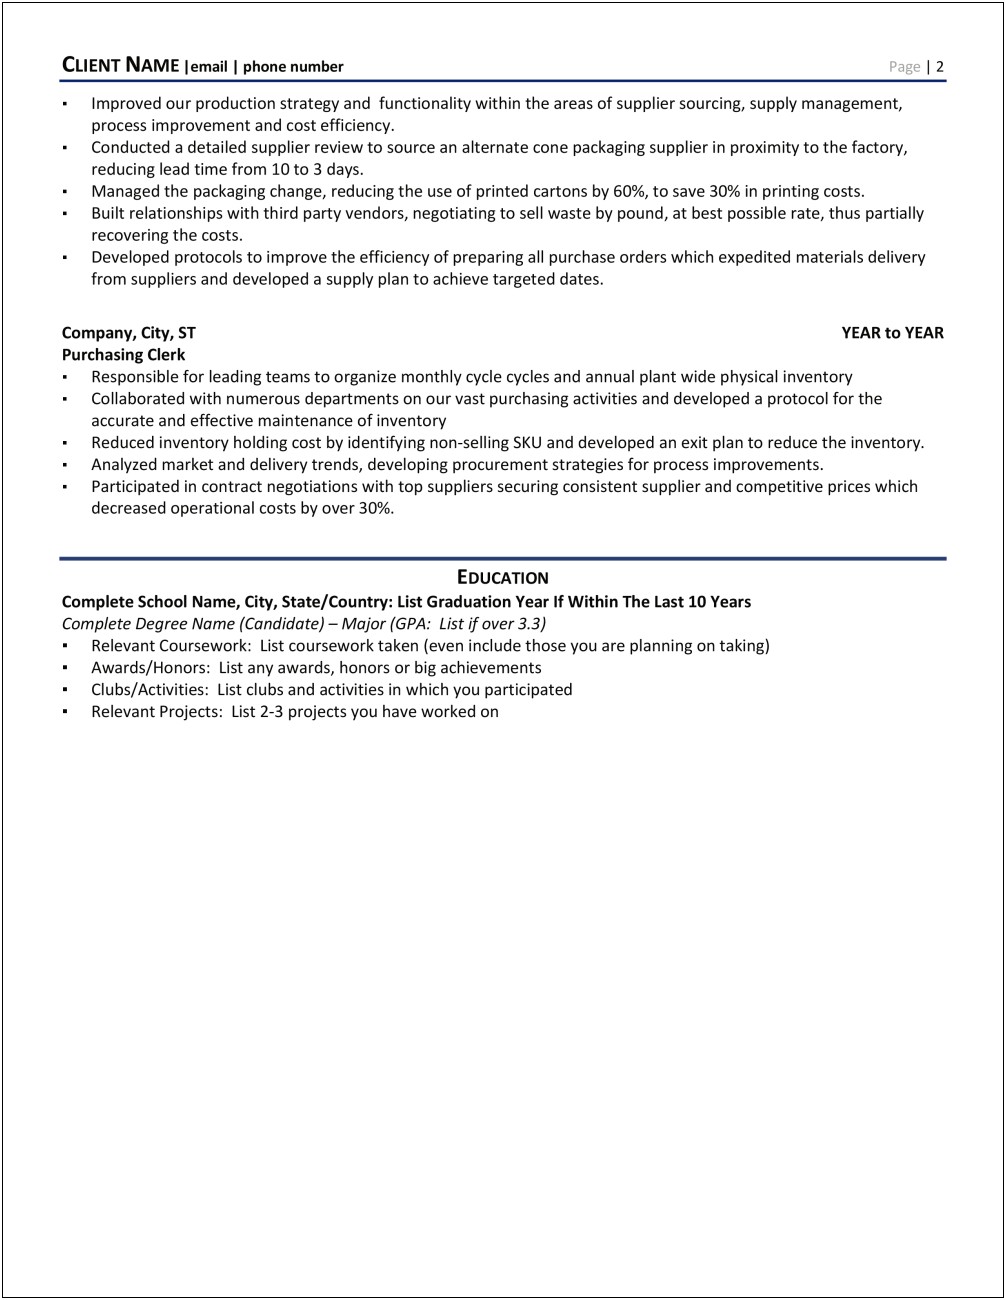 Example Resume For Inventory Clerk